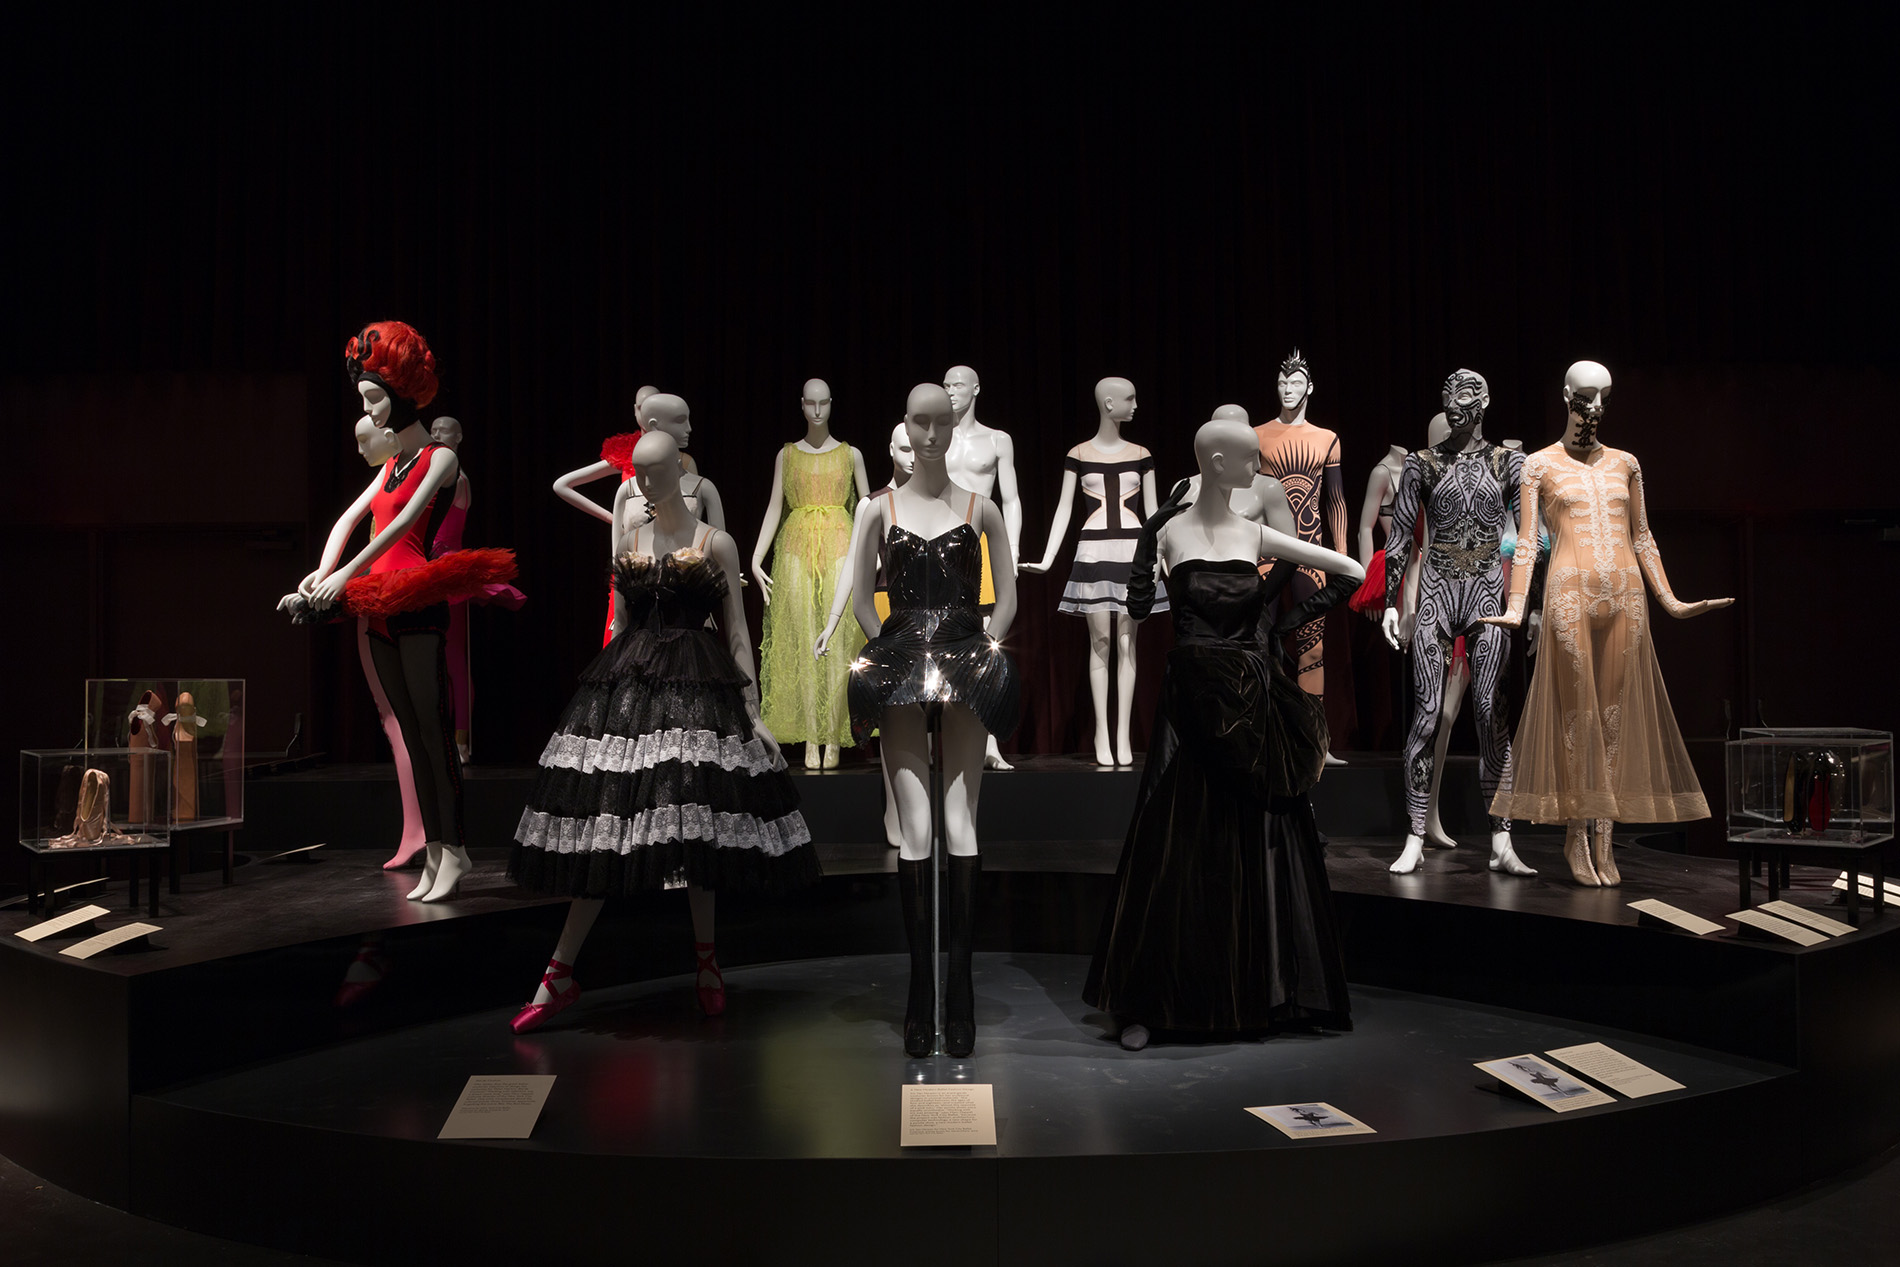 dance costumes and dance-inspired dresses on a black platform